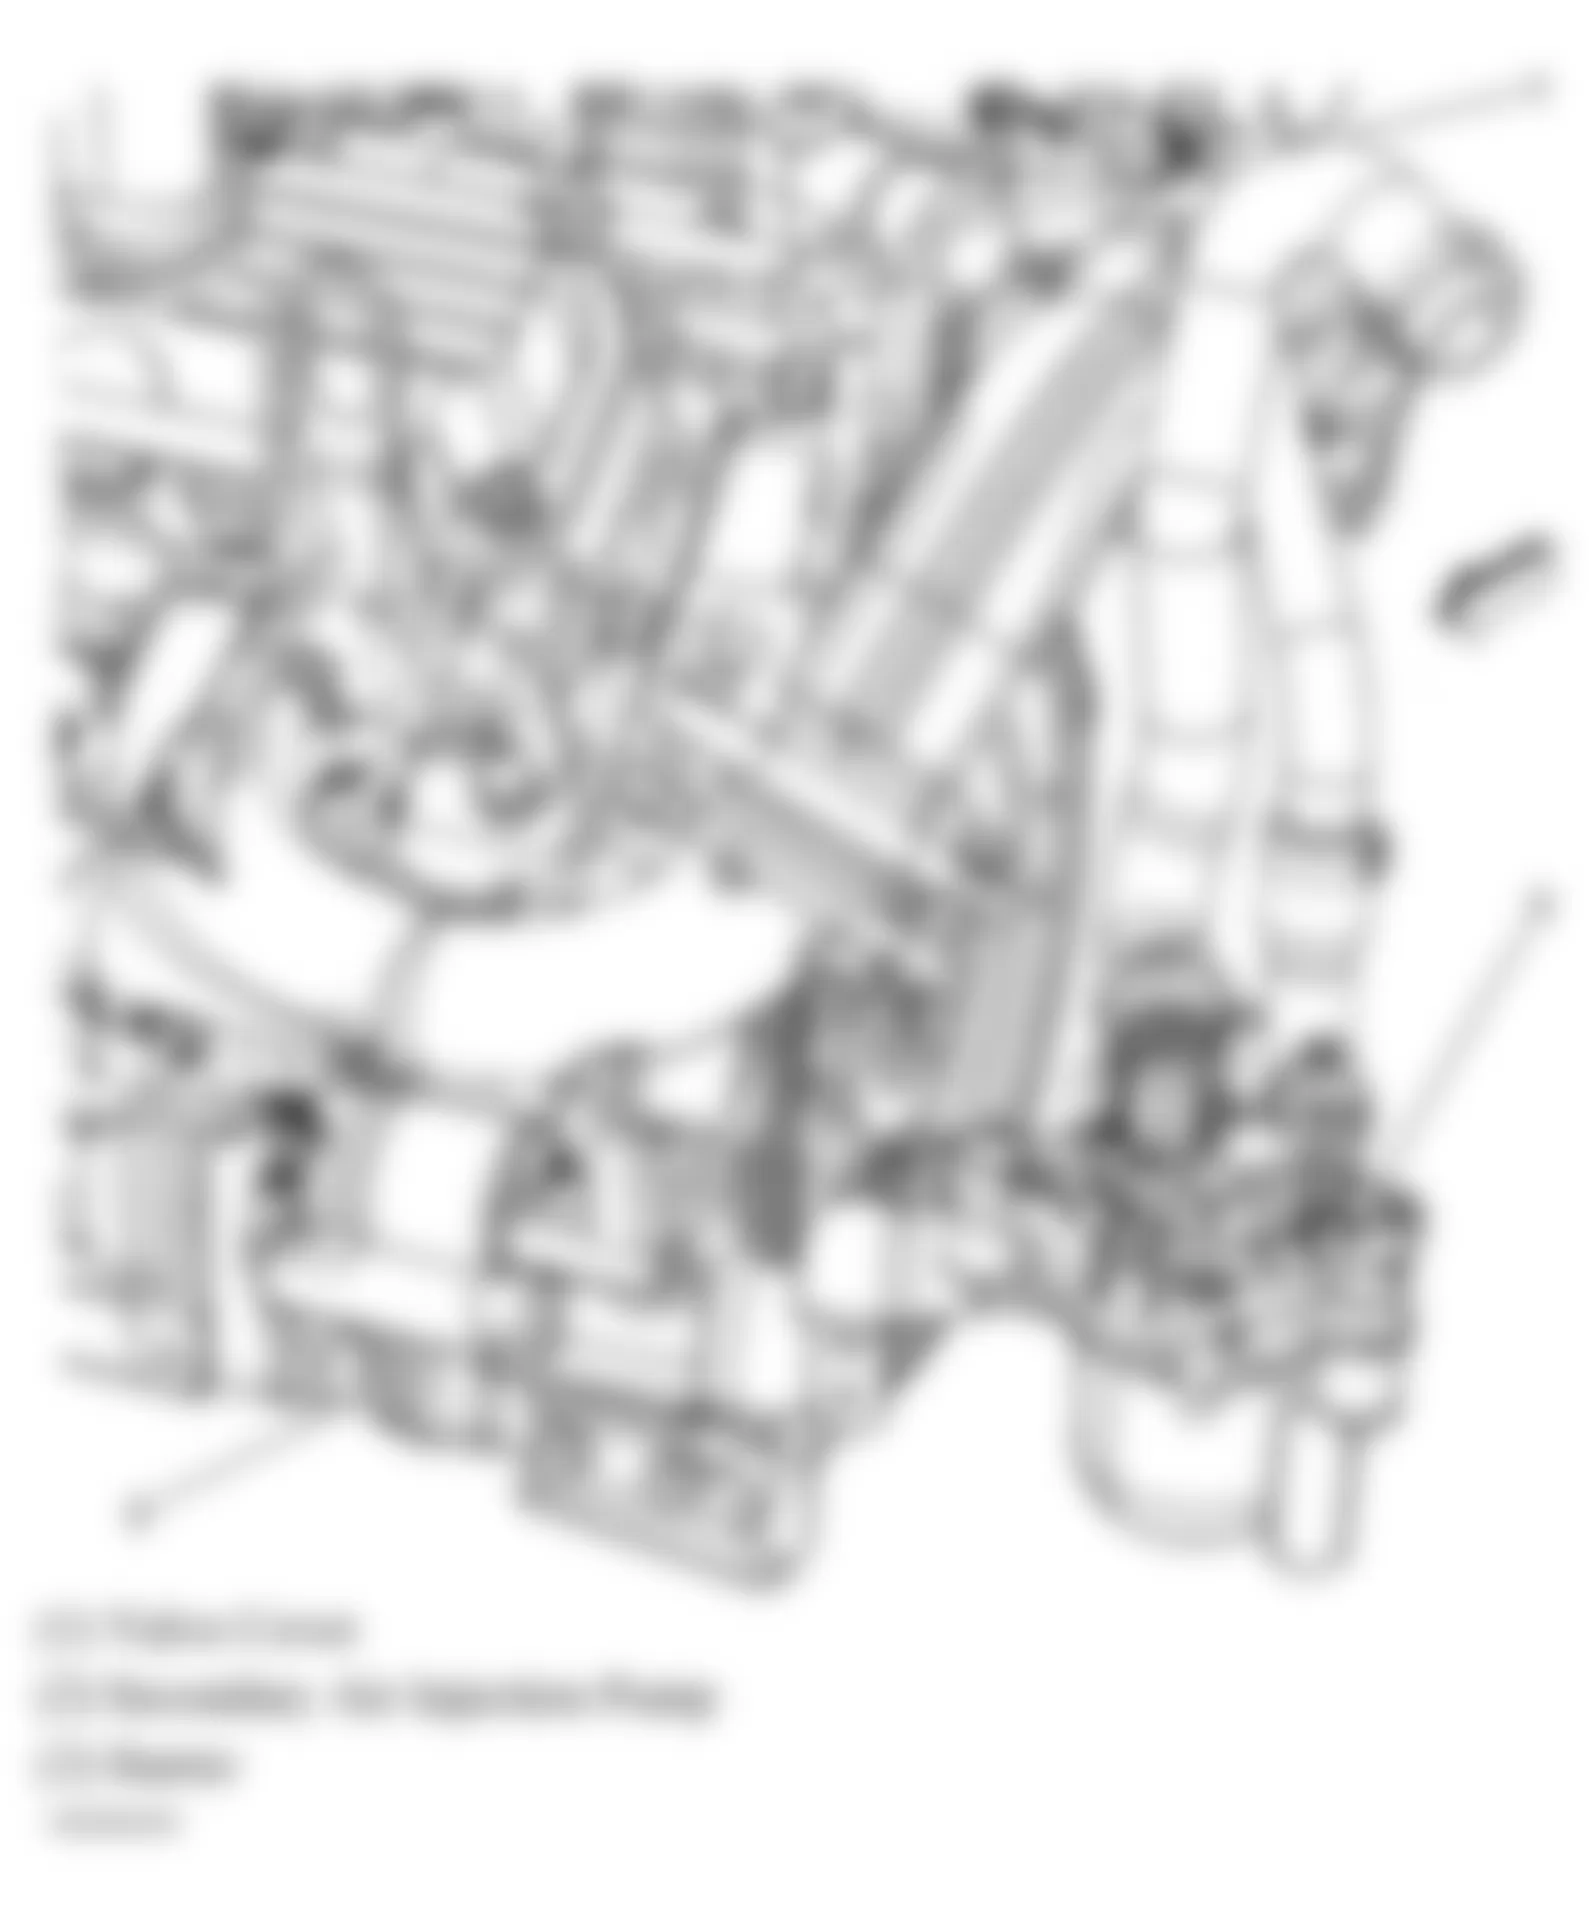 Buick LaCrosse CXS 2006 - Component Locations -  Left Rear Of Engine (3.8L)